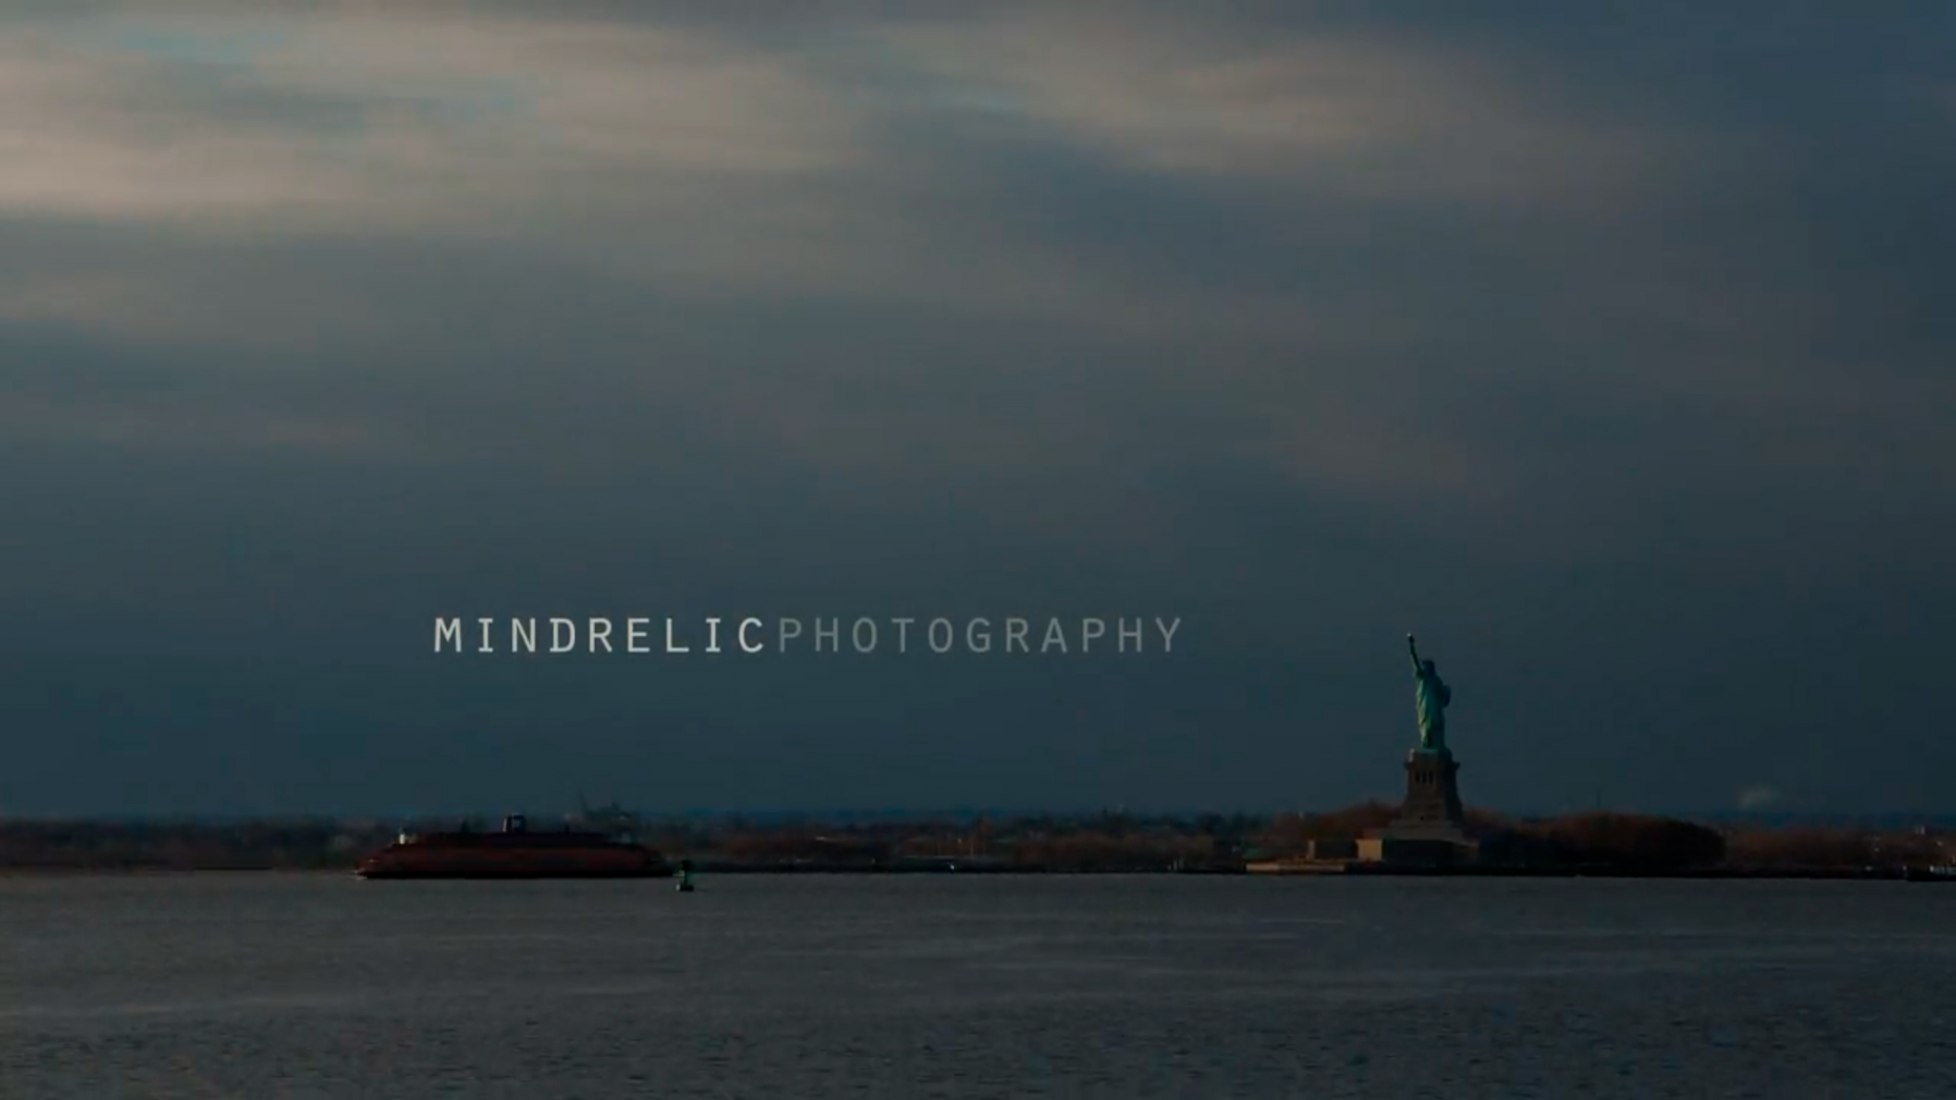 NYC Mindrelic Timelapse by Josh Owens 